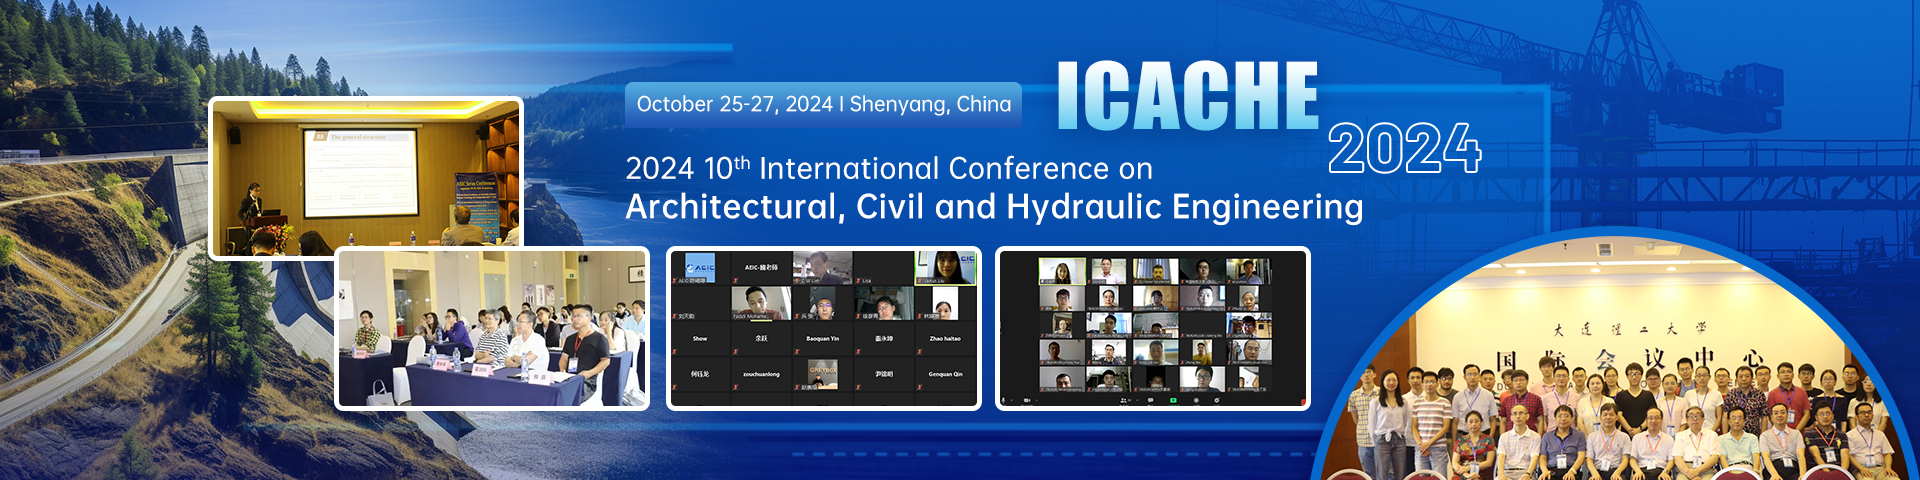 2024 10th International Conference on Architectural, Civil and Hydraulic Engineering (ICACHE 2024), Shenyang, China,Liaoning,China